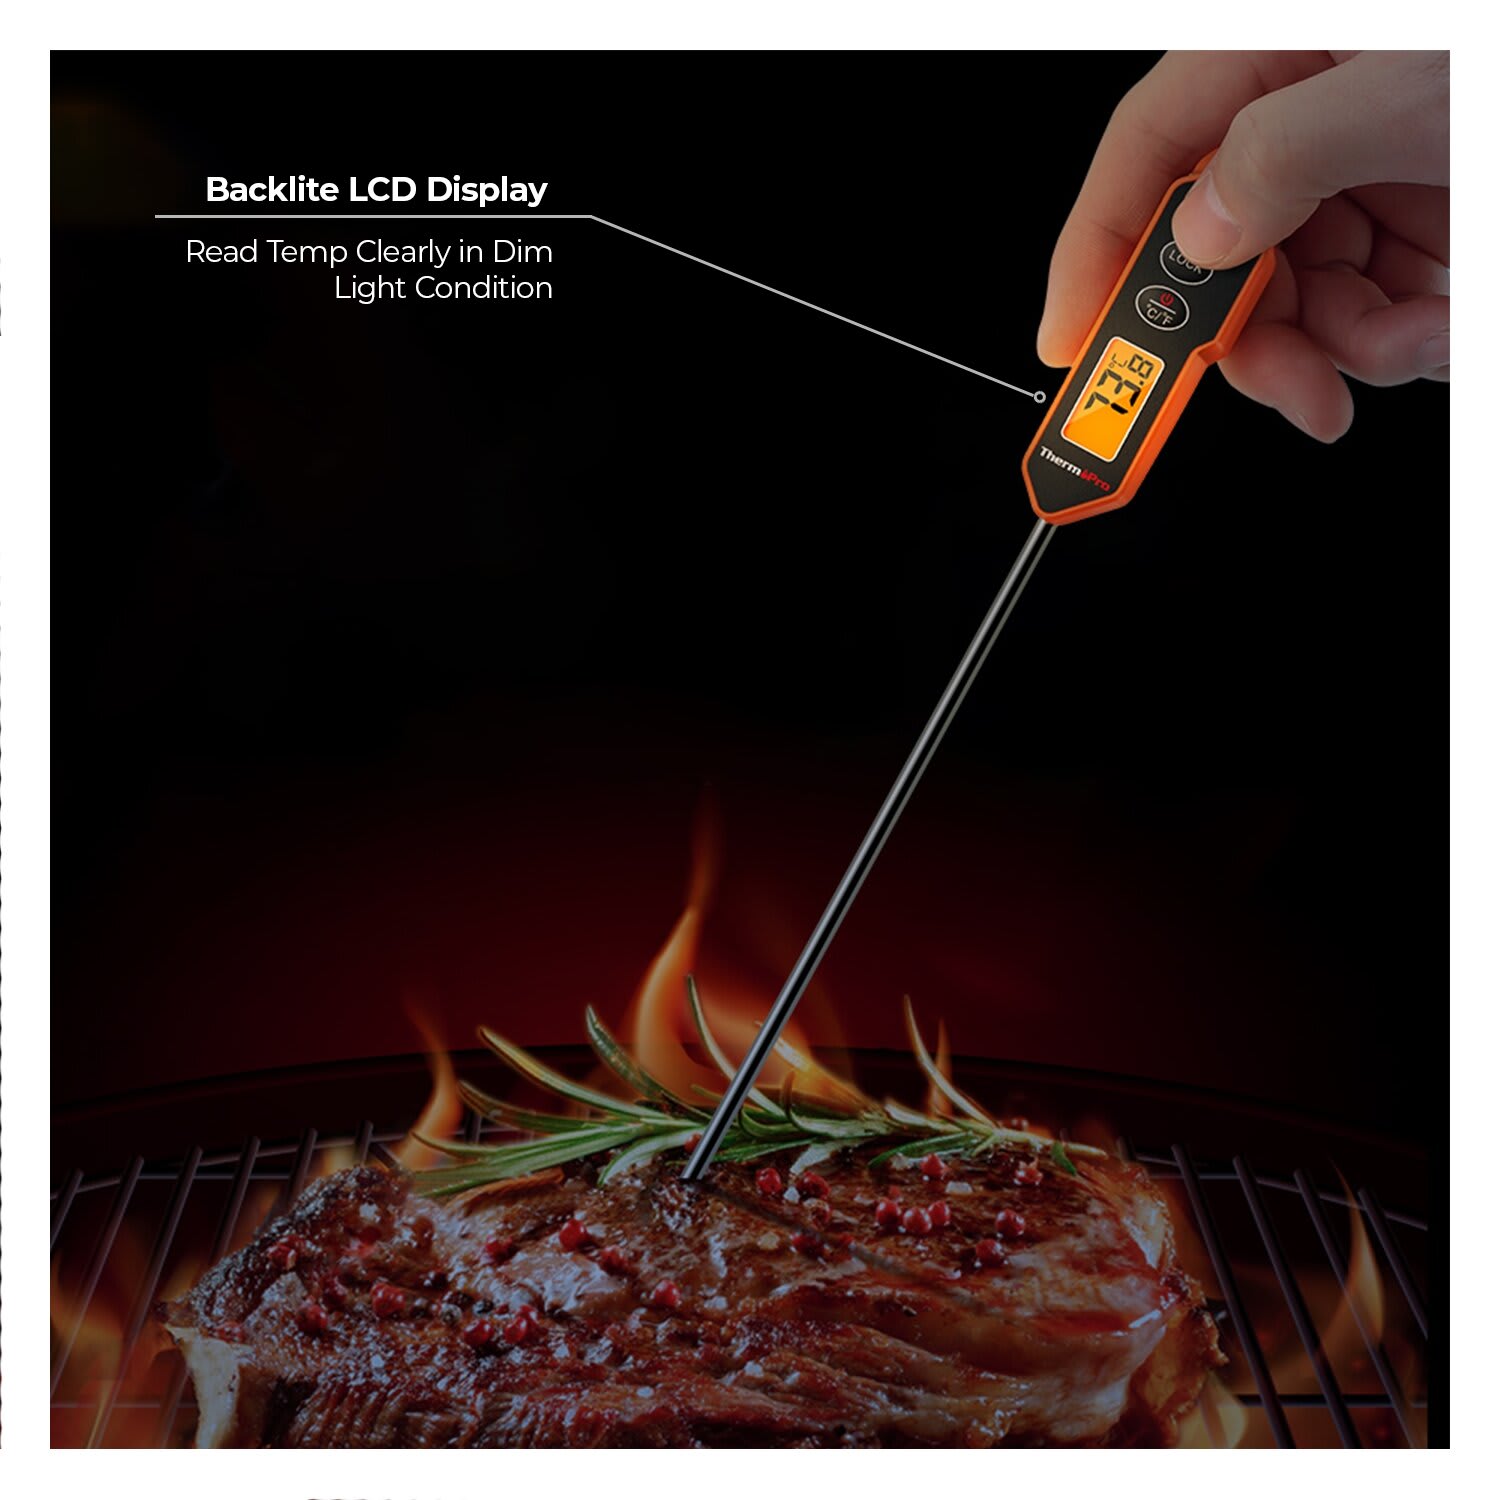 Dash Precision Quick-Read Meat Thermometer - Waterproof Kitchen and Outdoor Food Cooking Thermometer with Digital LCD Display - BBQ, Chicken